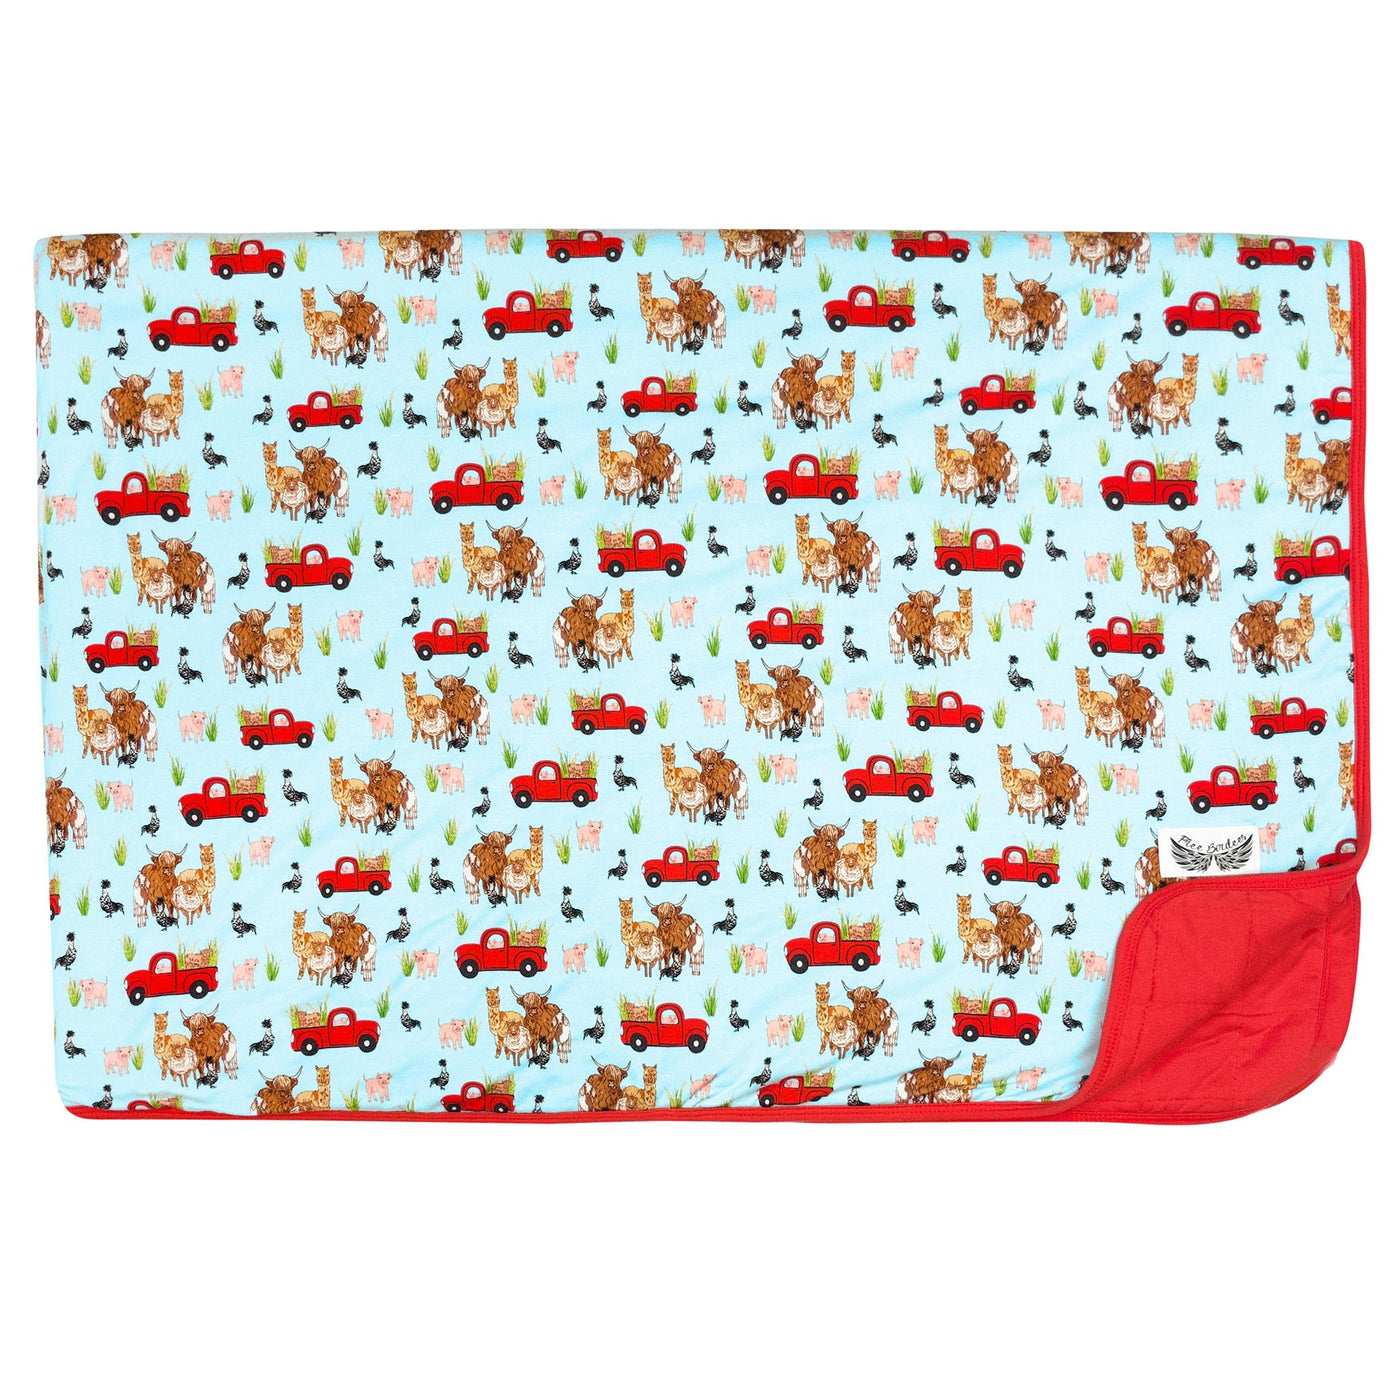 Ride with My Crew Quilted Toddler Blanket - Free Birdees